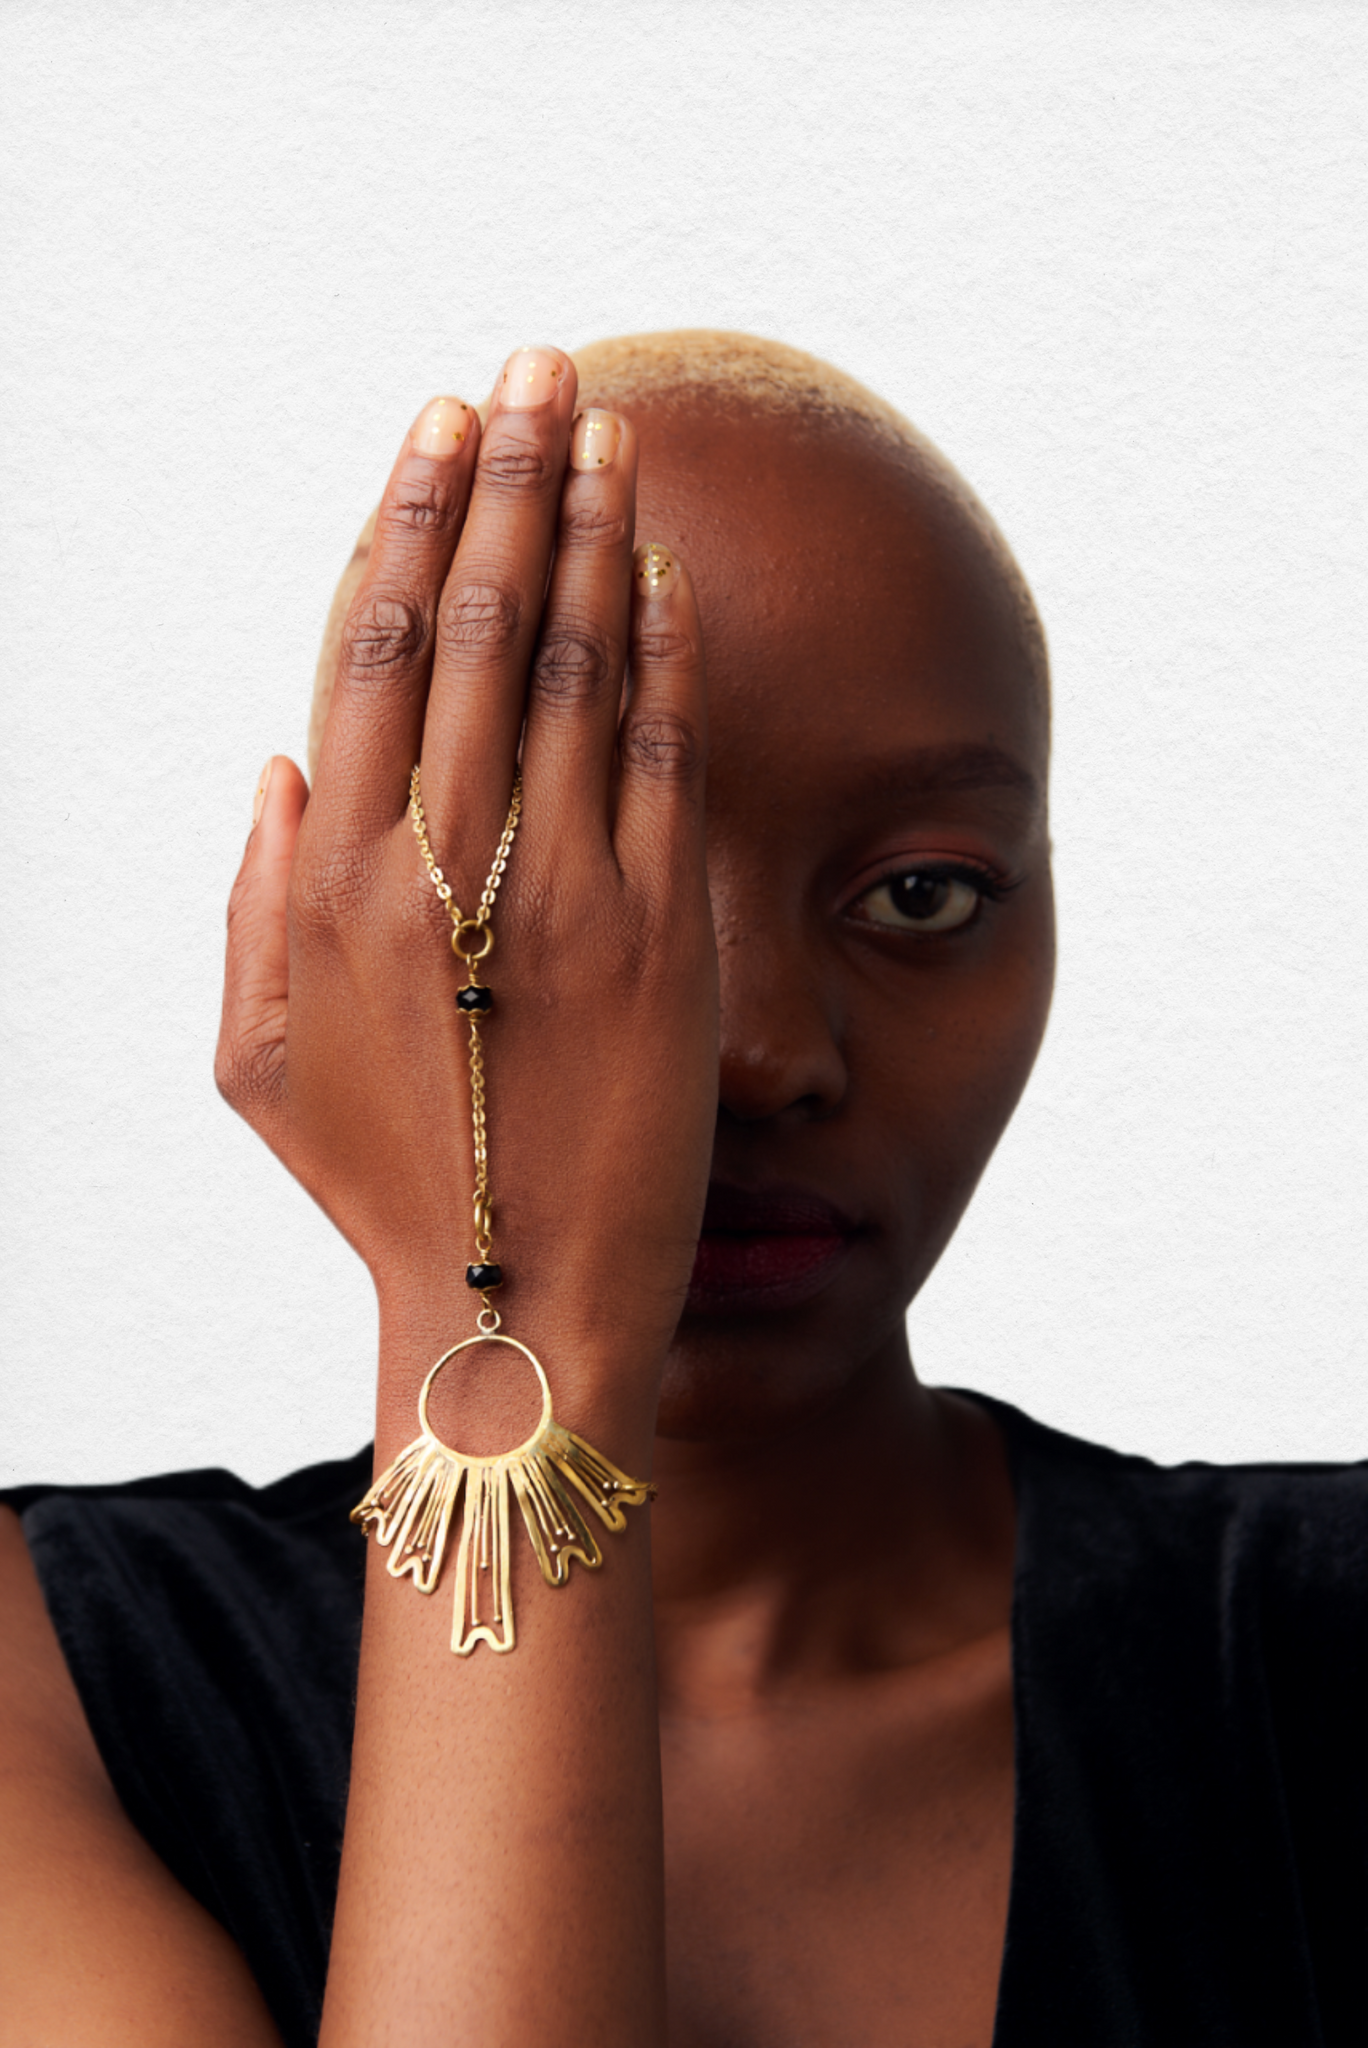 Shop the Jewellery Collection on Arrai. Discover stylish, affordable clothing, jewelry, handbags and unique handmade pieces from top Kenyan & African fashion brands prioritising sustainability and quality craftsmanship. Shop Fashion online on Arrai.shop.